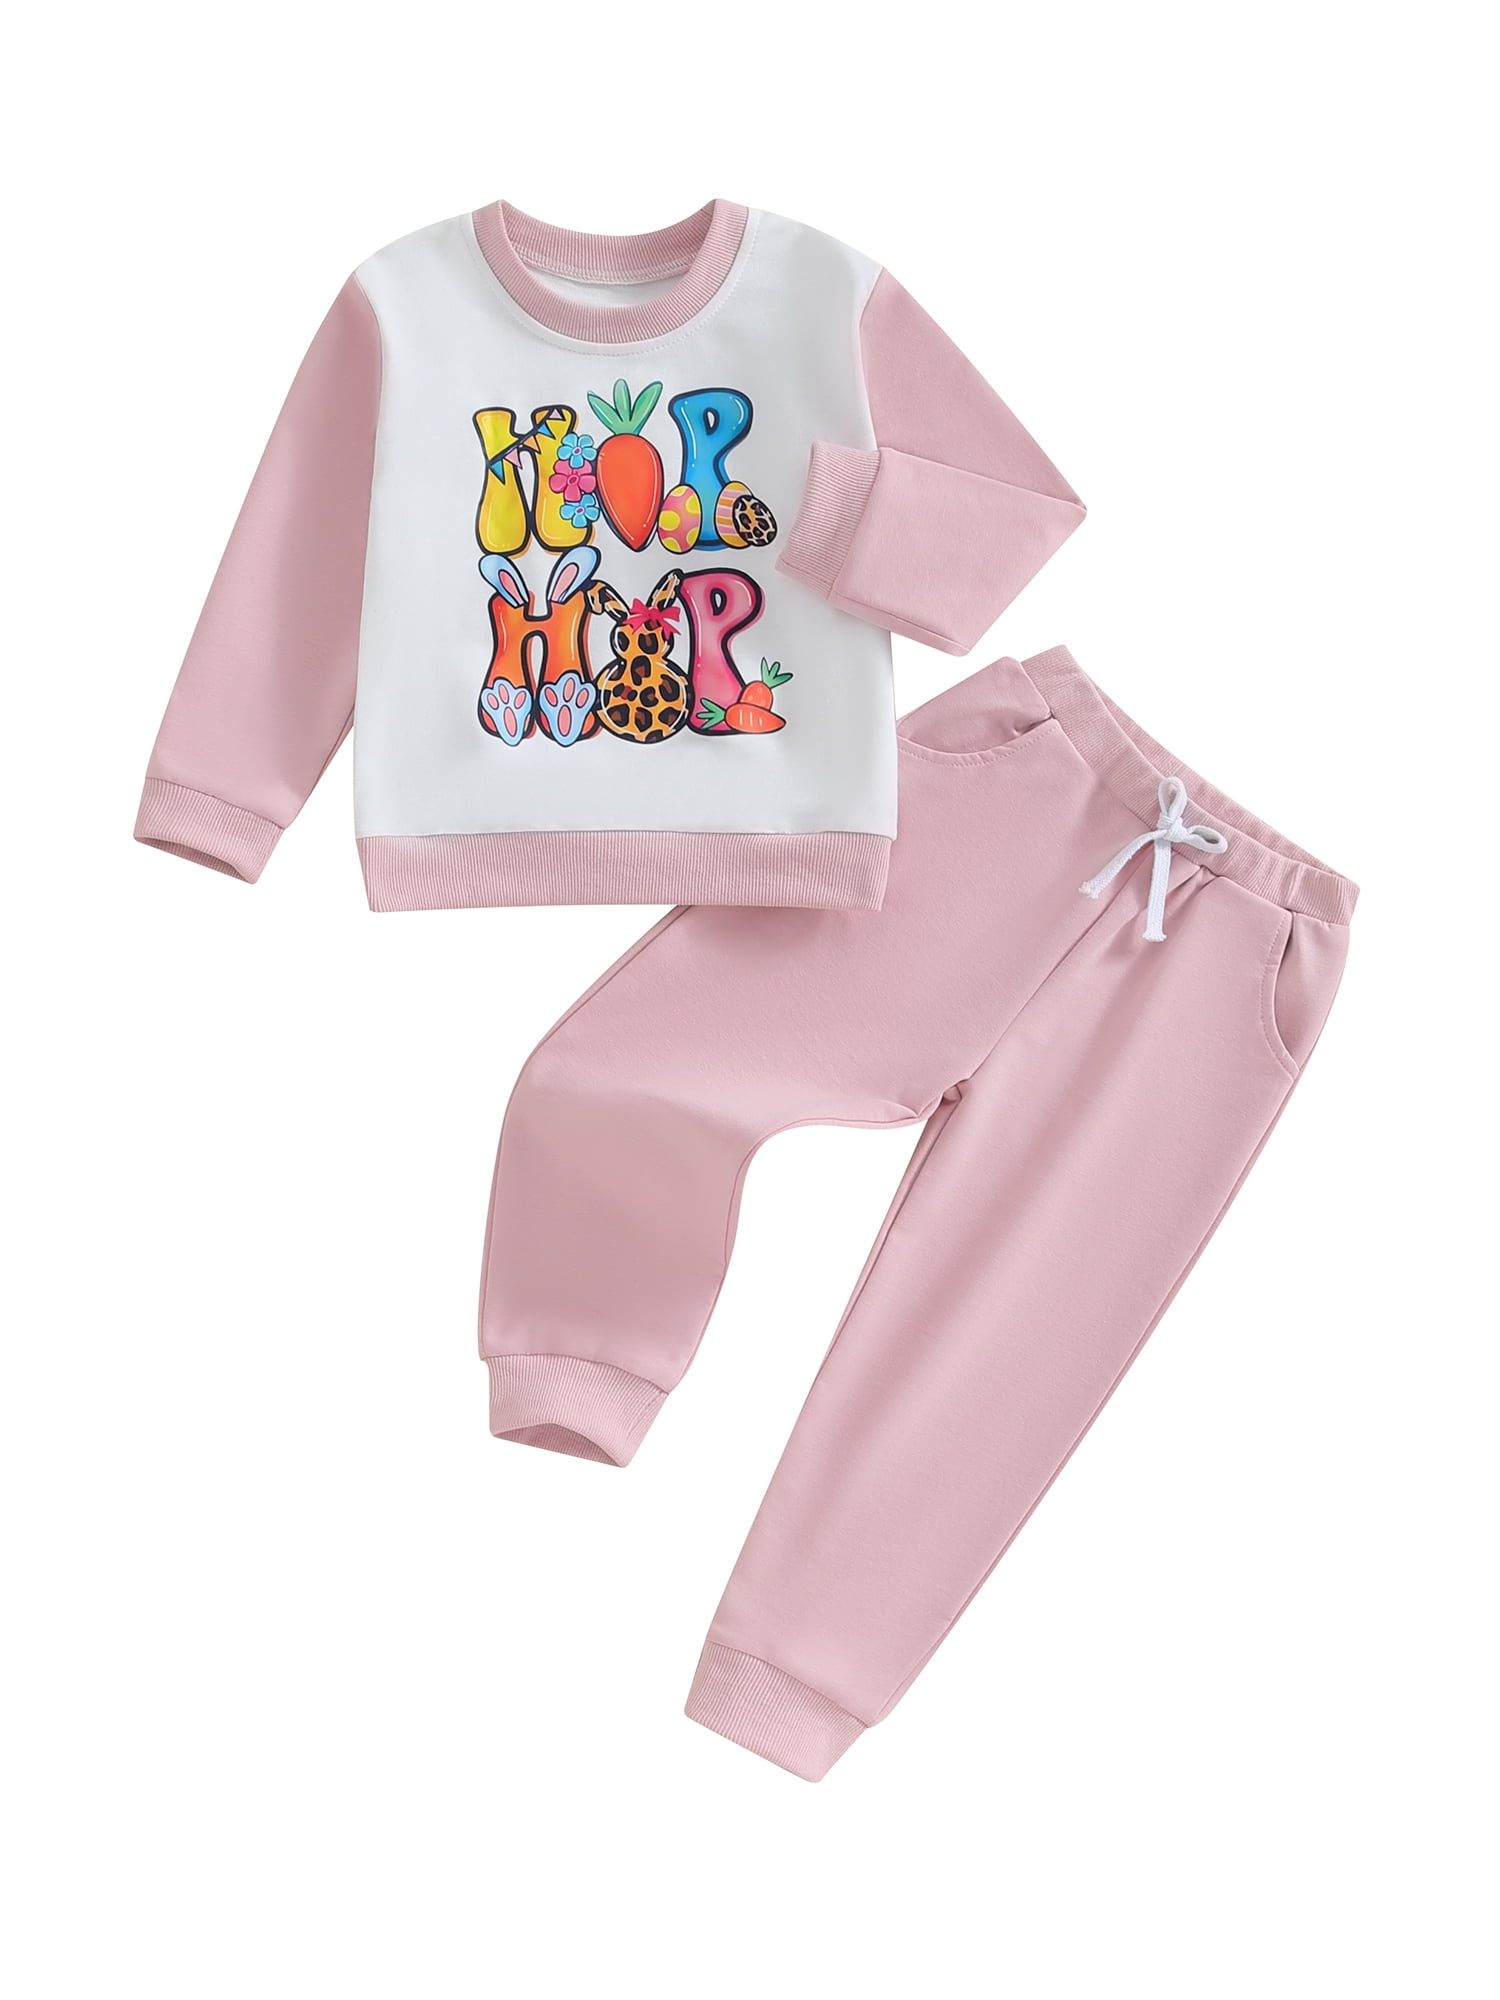  wybzd Toddler Baby Boys Girls Easter Outfit Crewneck Sweatshirt  Bunny Top Carrot Rabbit Pants Sets Spring Summer Clothes (Pink, 0-6  Months): Clothing, Shoes & Jewelry